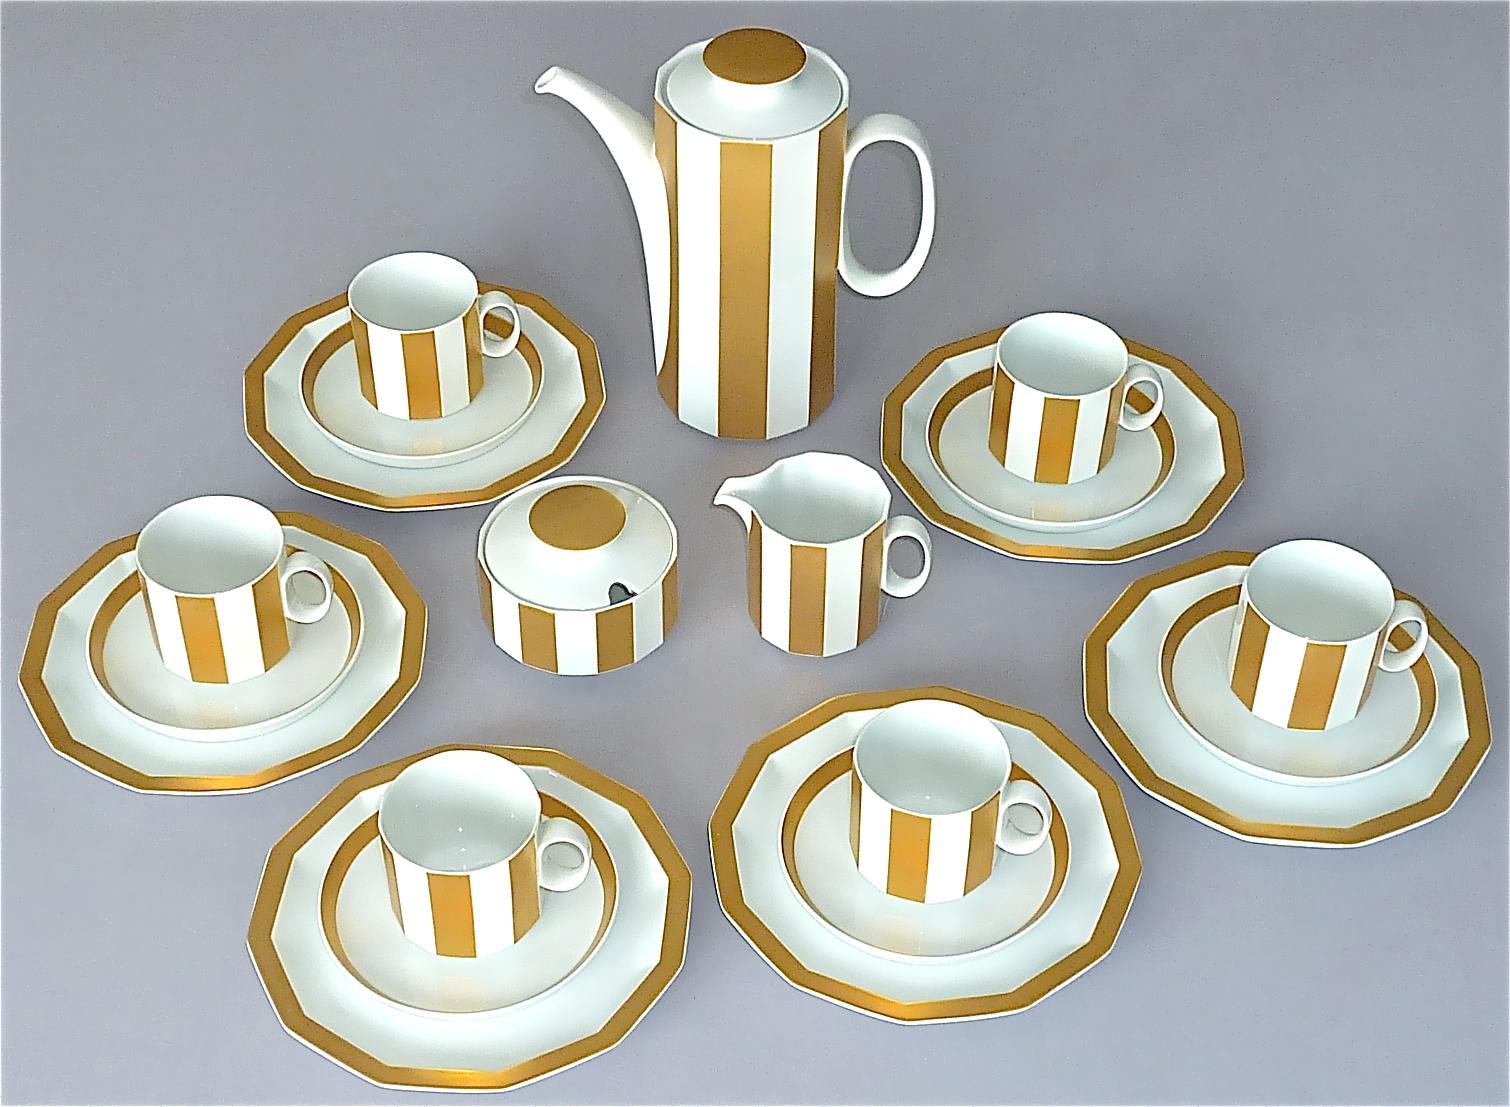 Fine and exquisite Tapio Wirkkala for Rosenthal studio-linie gilt white porcelain coffee set for 6 persons, Germany around 1960s to 1970s. This set belongs to the cabinet pieces so rarely used it stays in very good vintage condition with no defects.